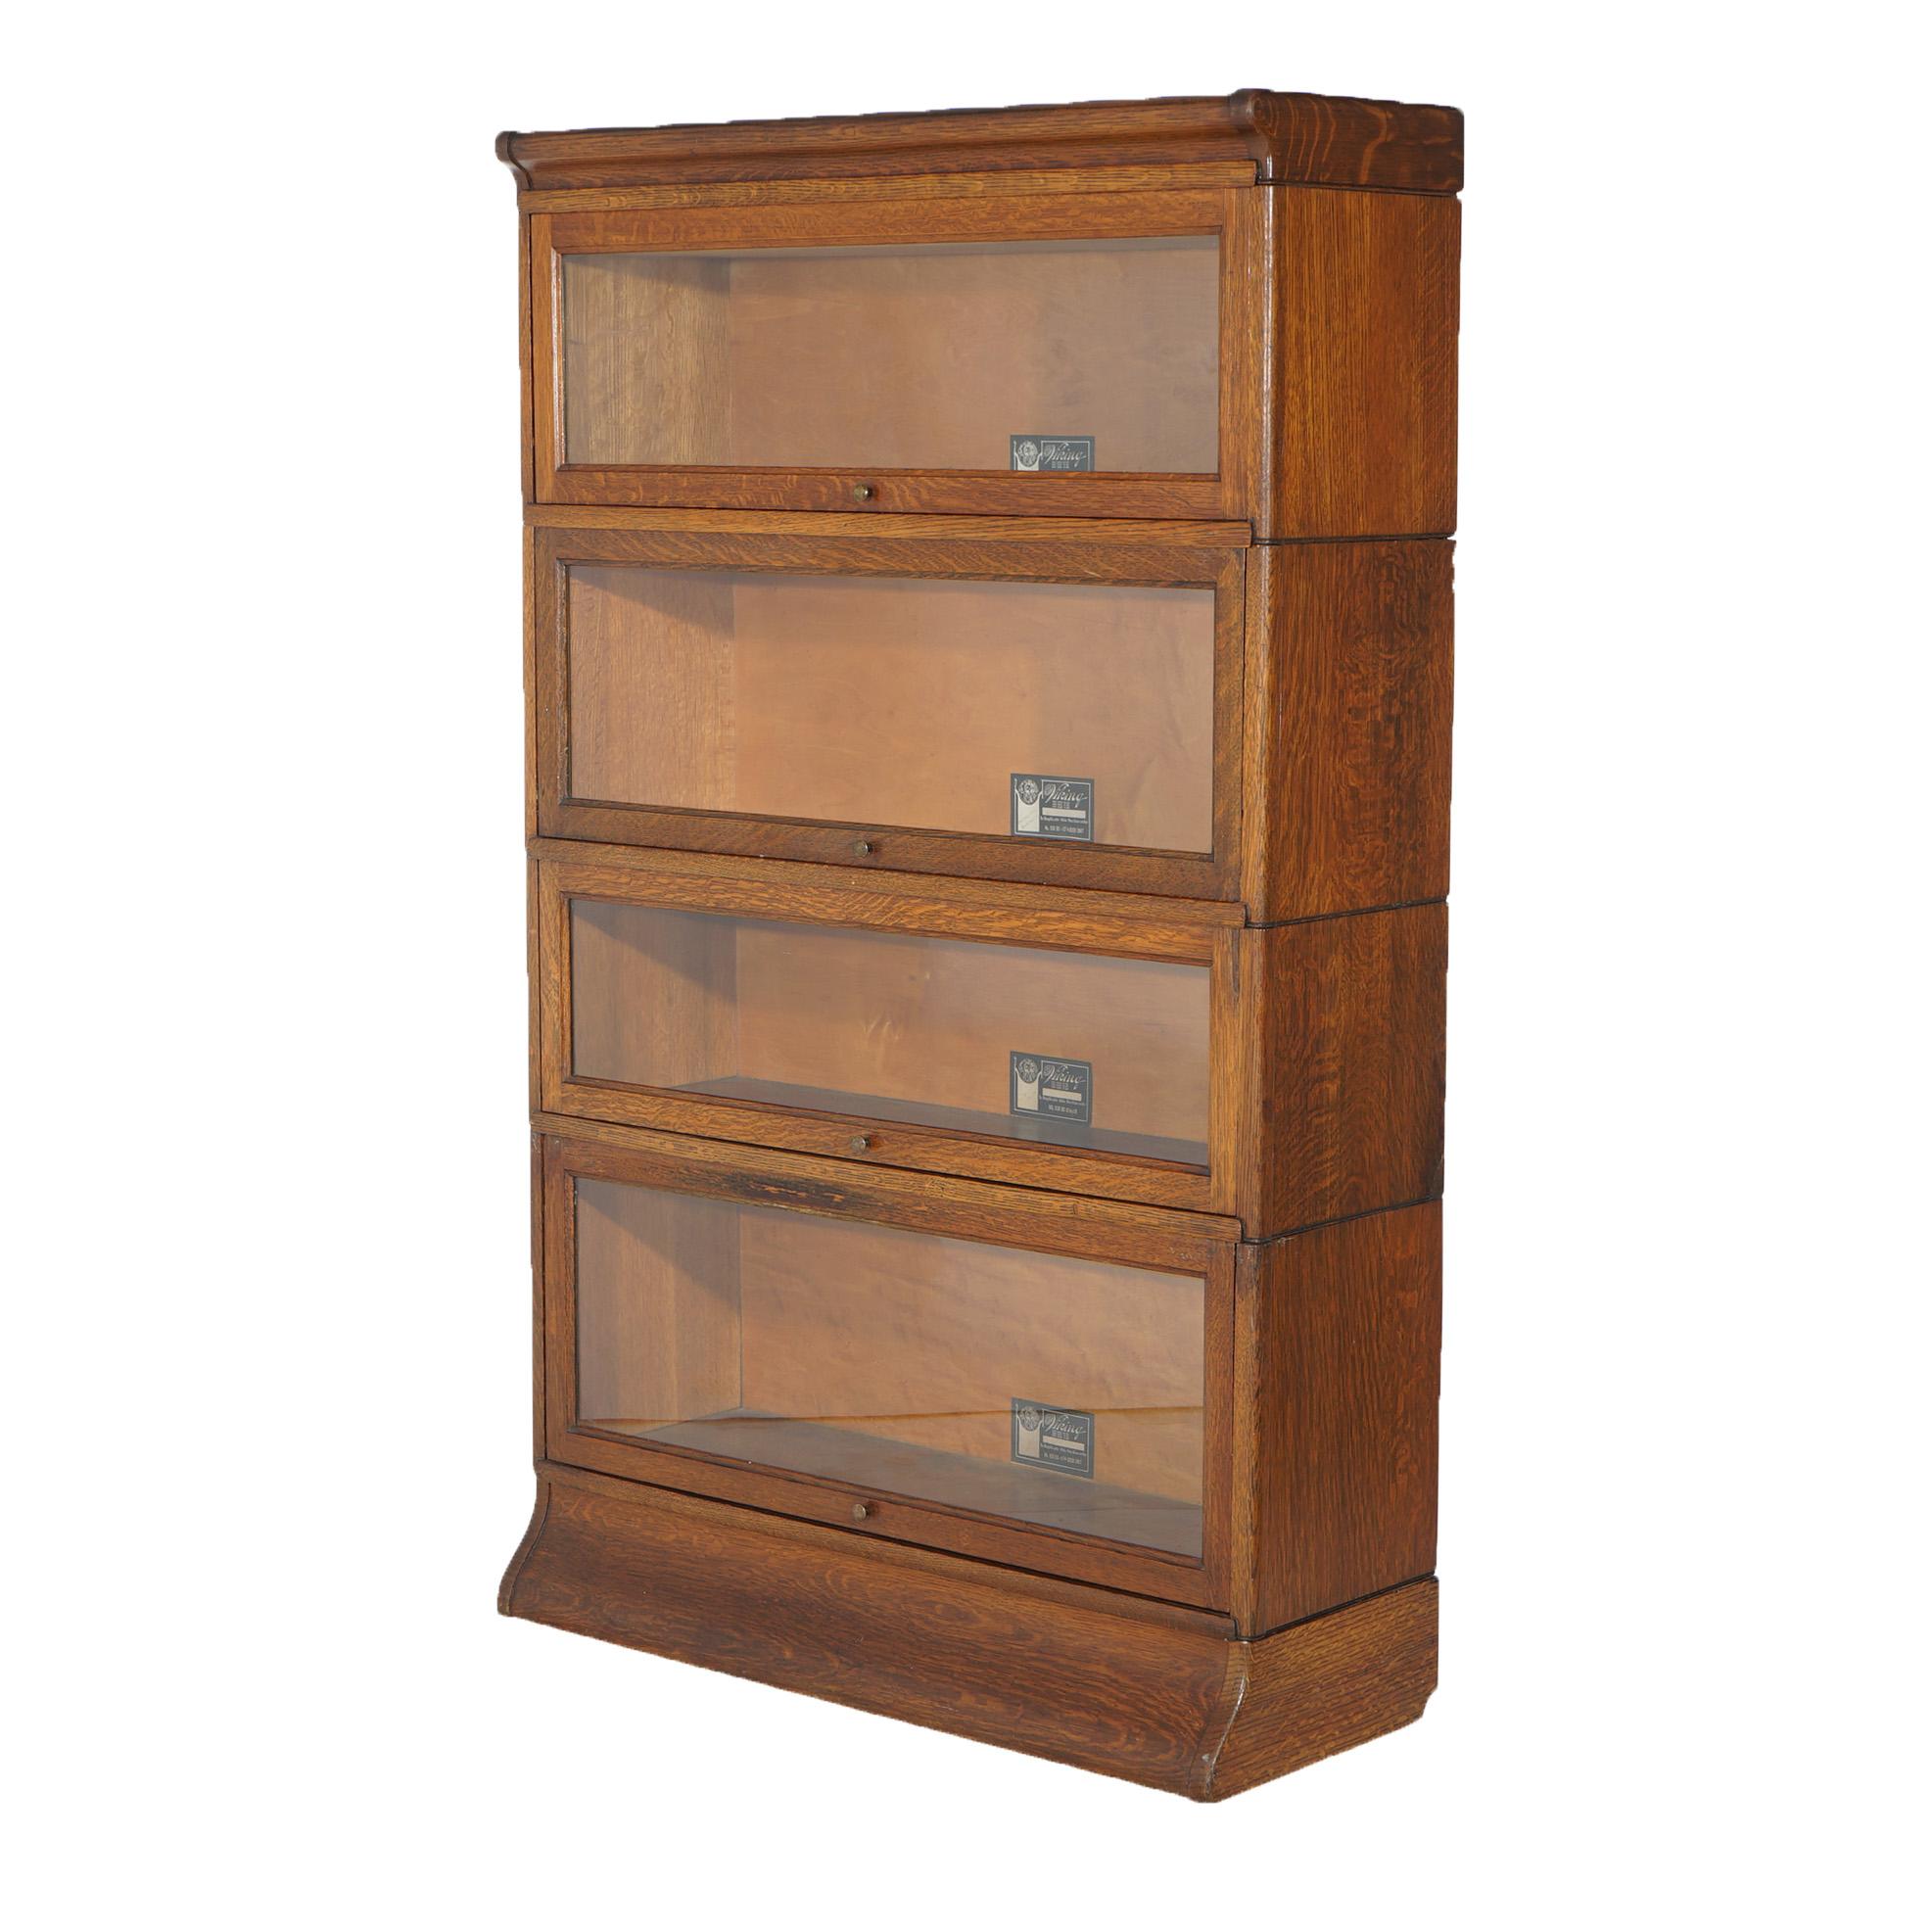 An antique Arts and Crafts Mission barrister bookcase by Viking offers oak construction with four stacks, each having pull-out glass doors, raised on ogee base, maker label as photographed, c1910

Measures - 55.5